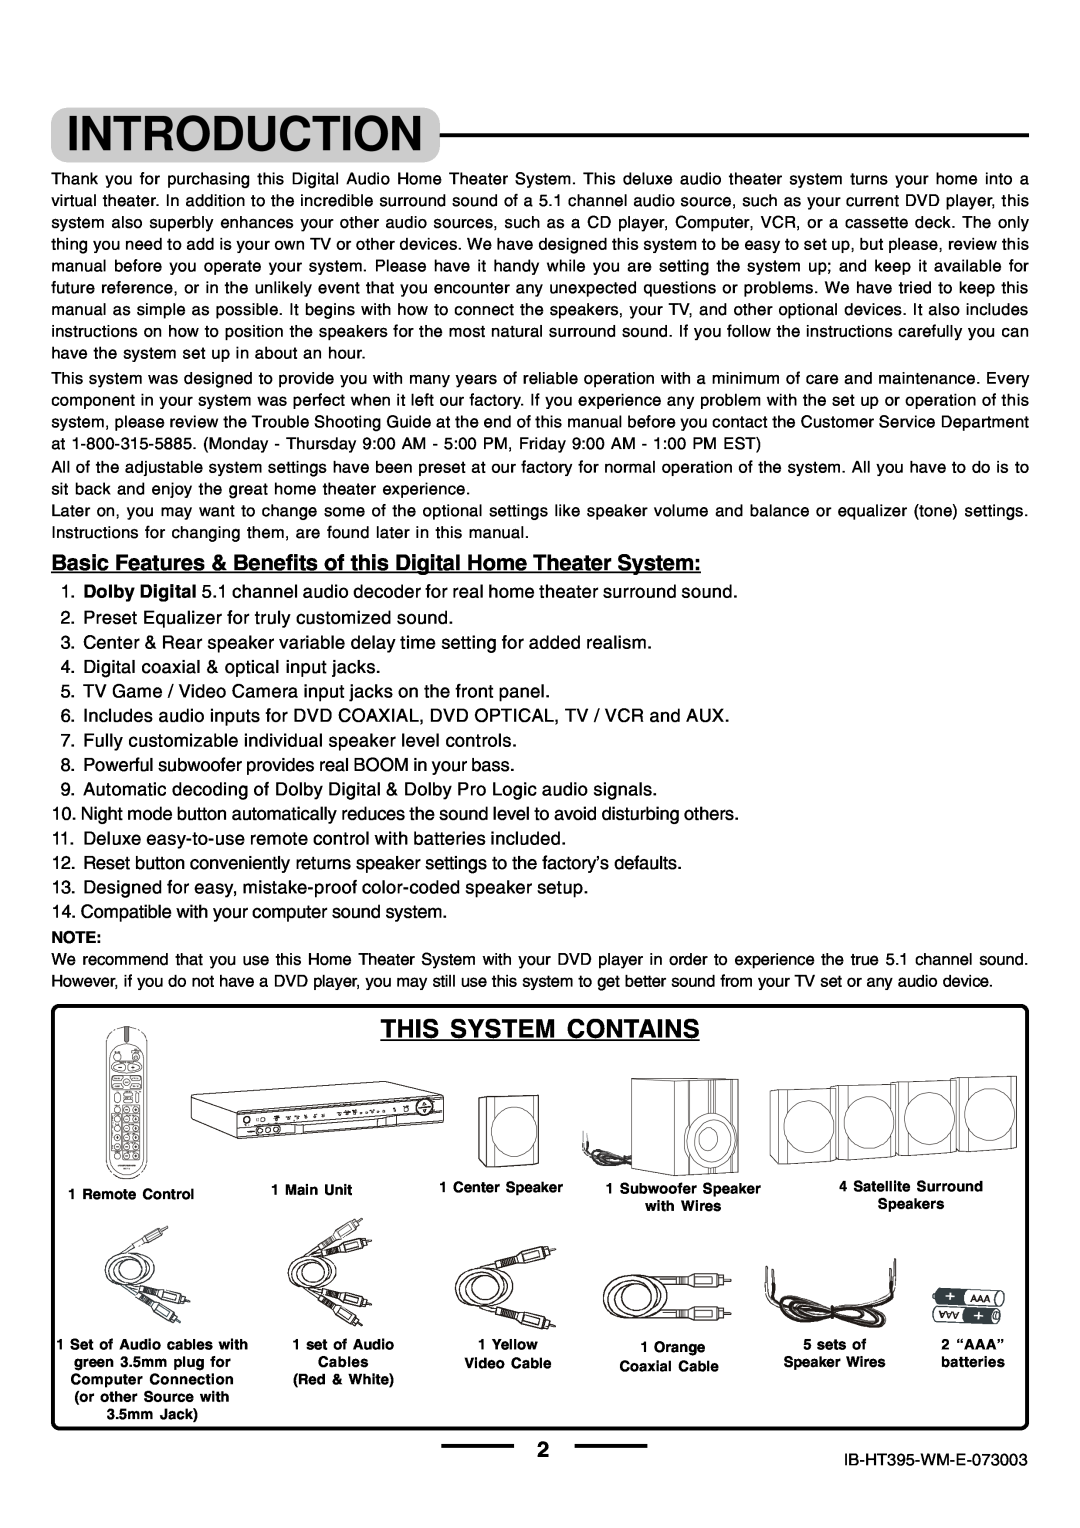 Lenoxx Electronics HT-395 manual Introduction, This System Contains 